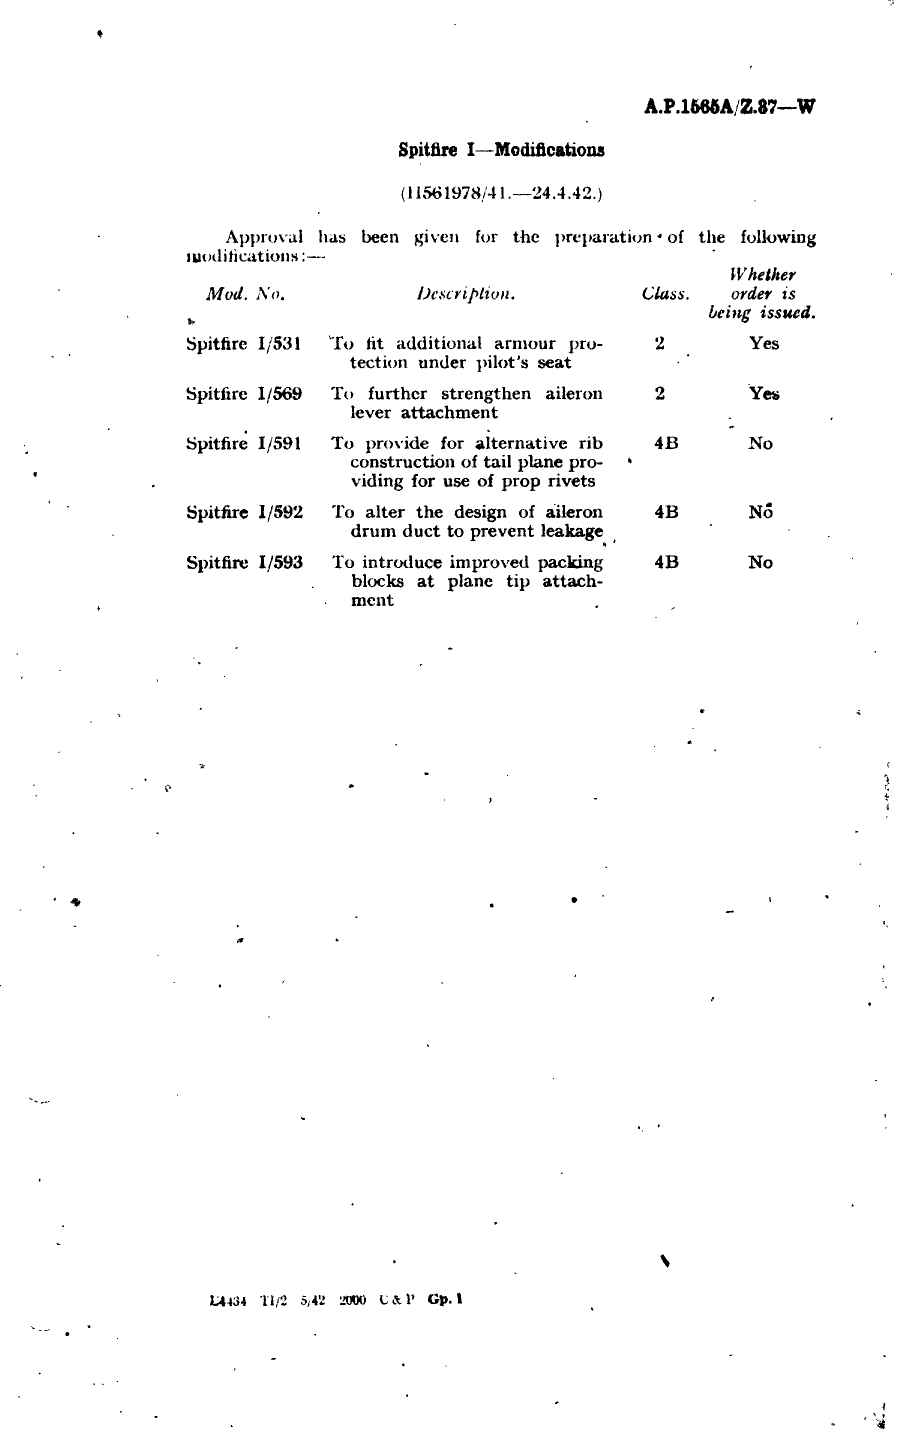 Sample page 1 from AirCorps Library document: Spitfire I Modifications